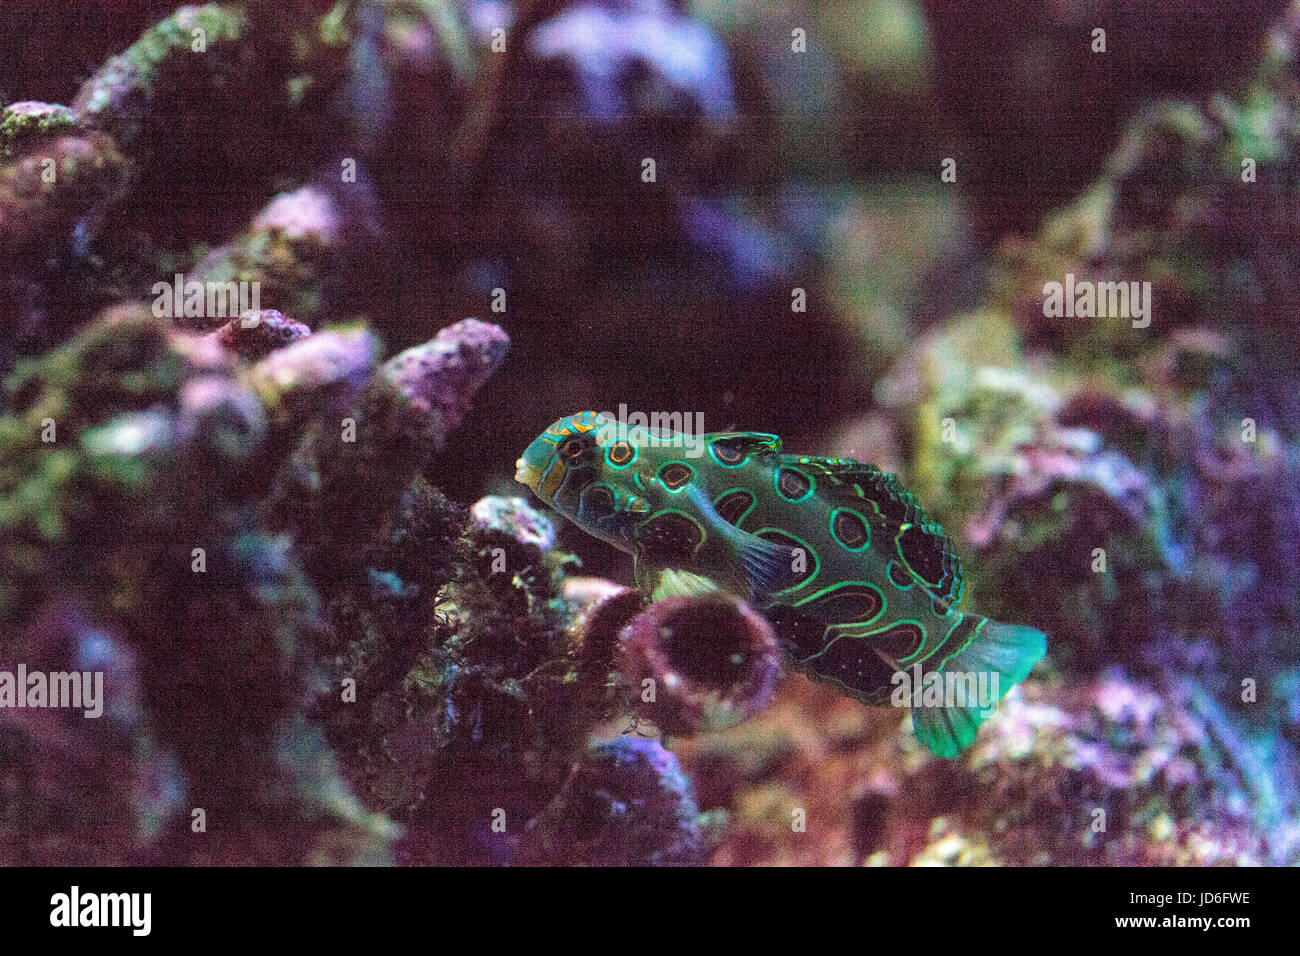 Picturesque Dragonet fish Synchiropus picturatus swims over a coral reef Stock Photo